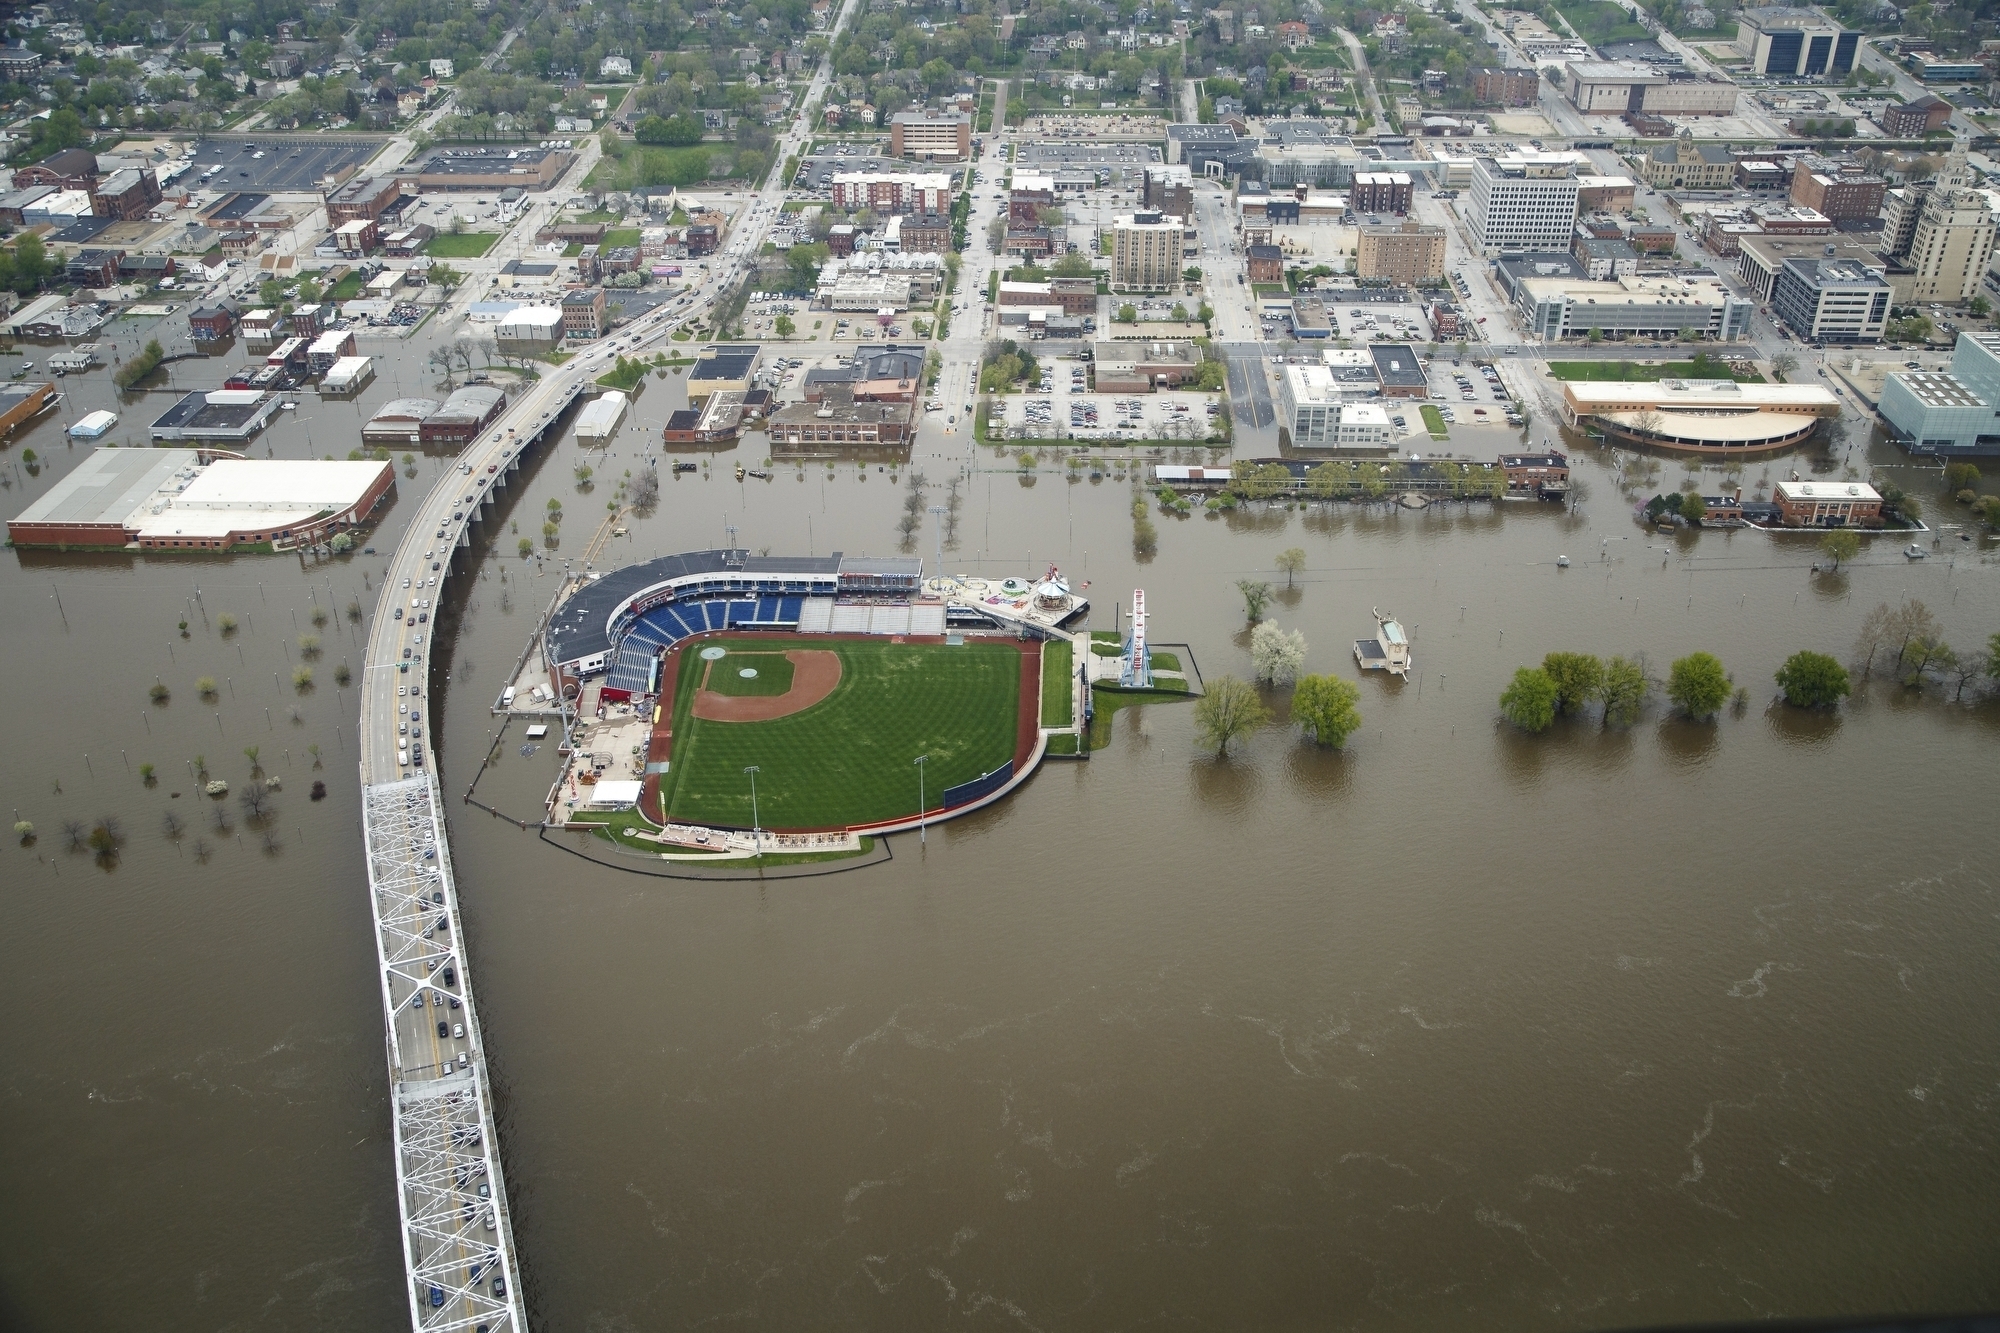 Heavy spring rains in 2019 caused floods across the Mississippi River region, including Davenport, Iowa